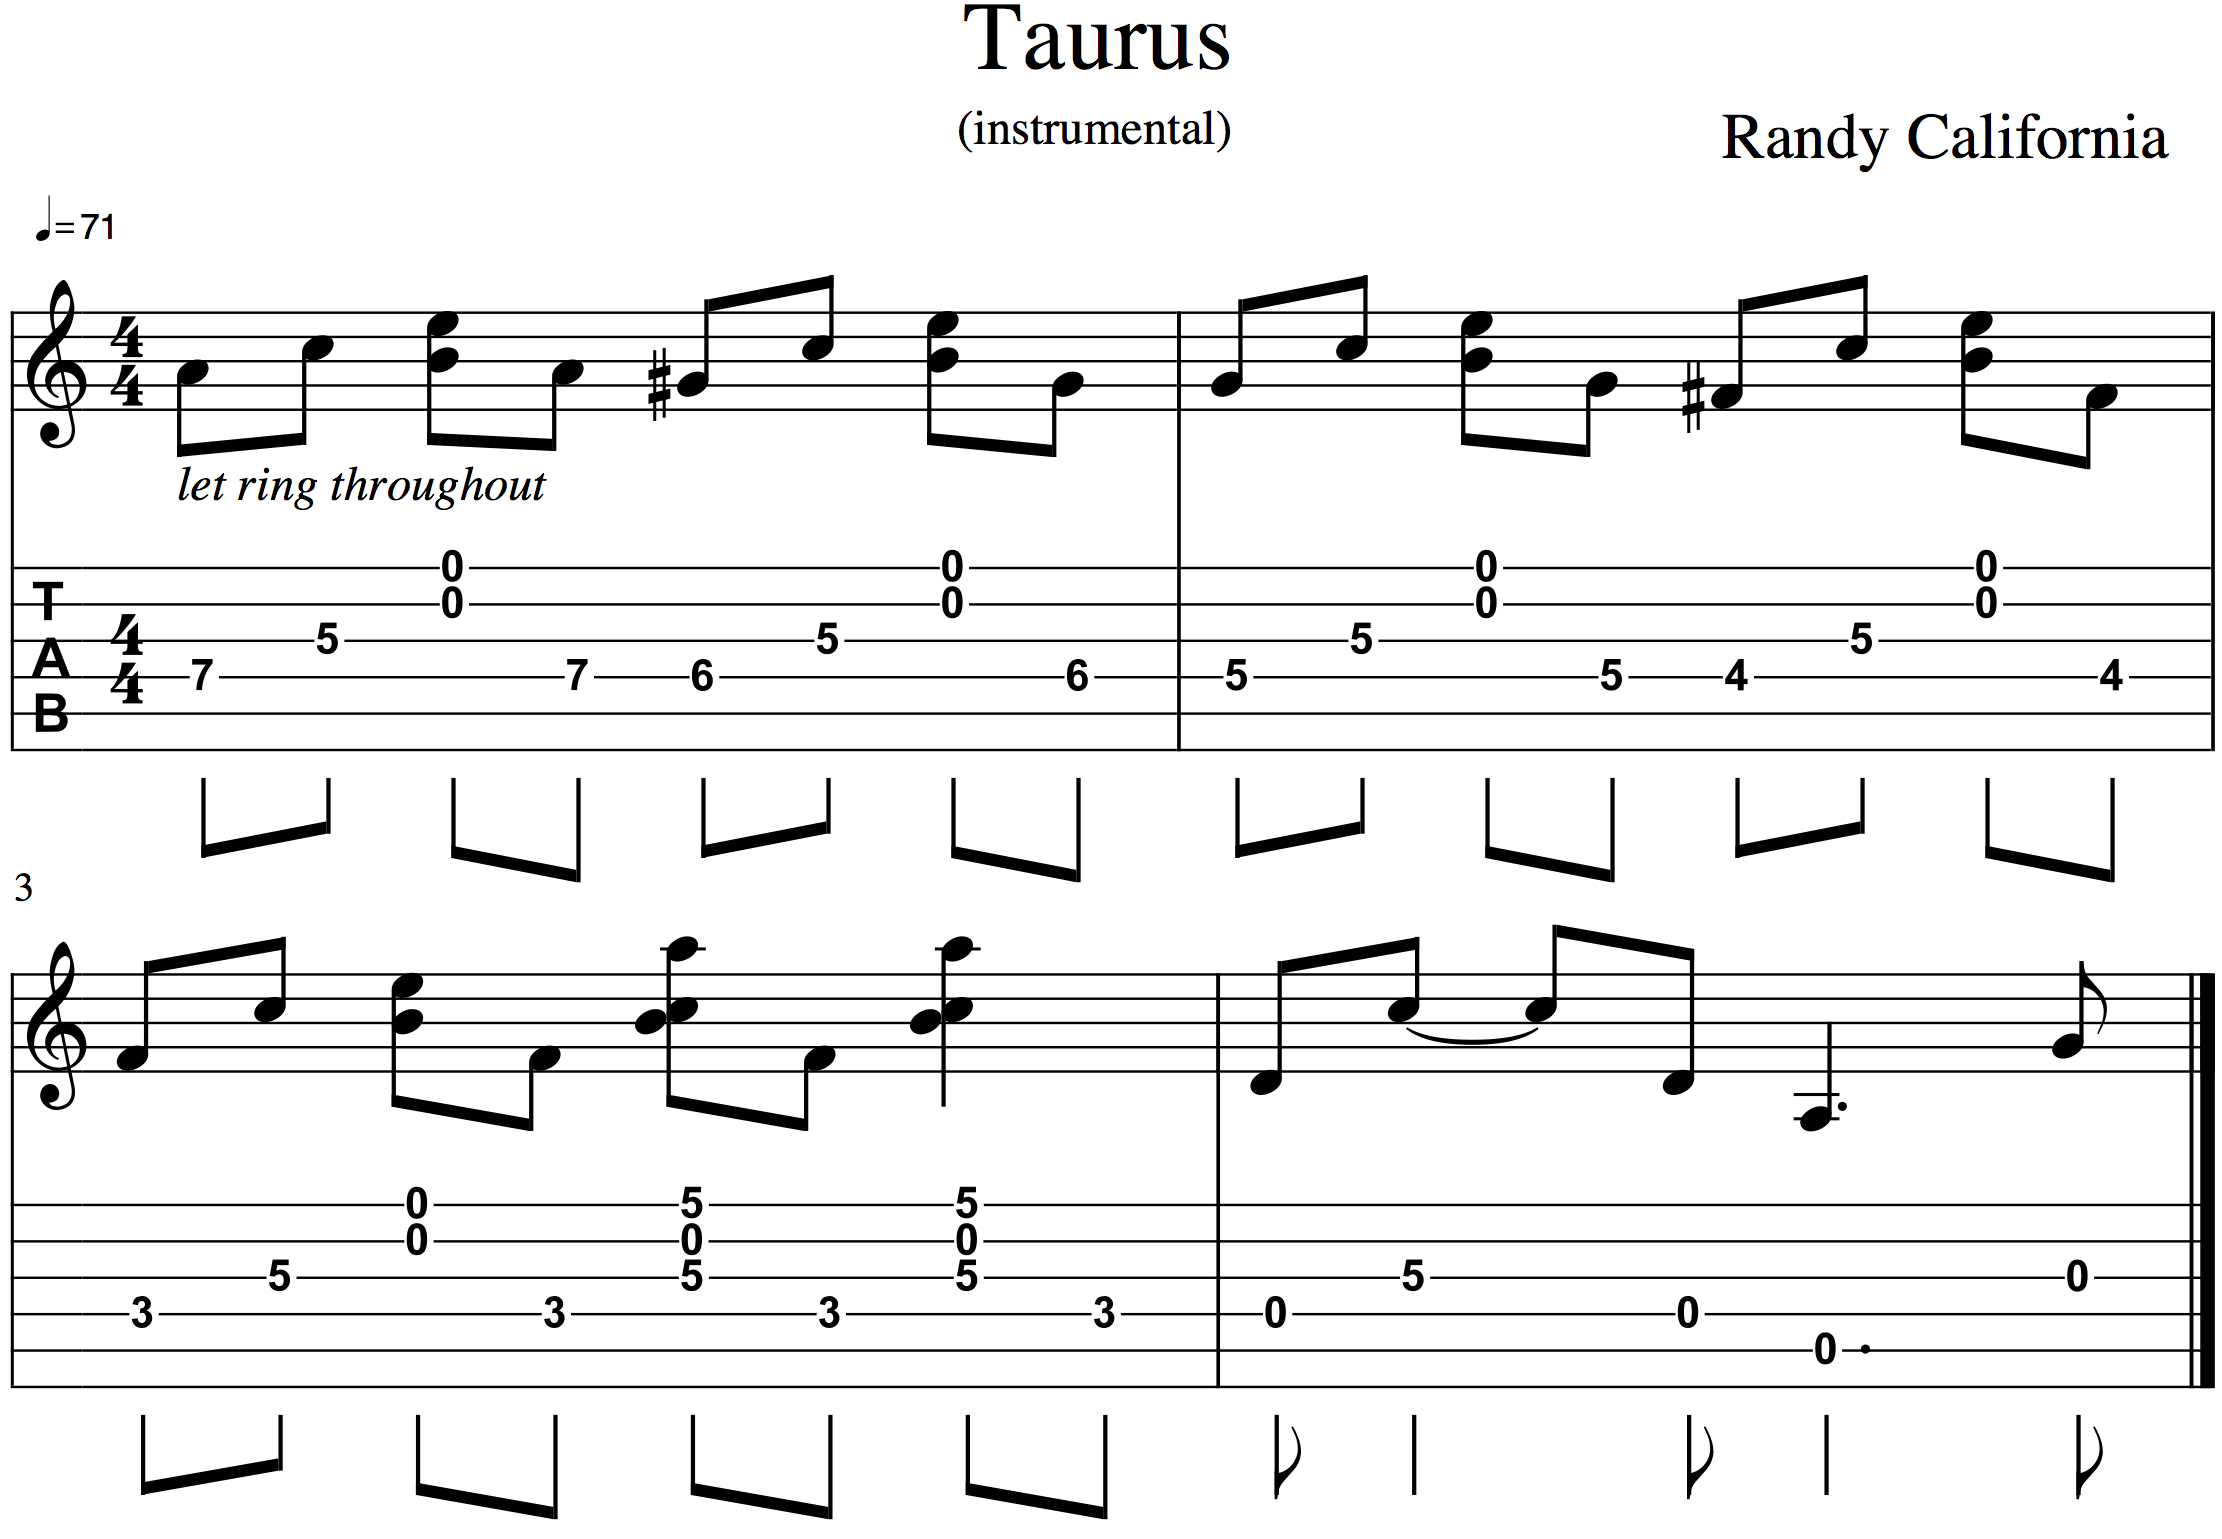 Stairway To Heaven Chords What Exactly Did Stairway To Heaven Copy From Taurus Joe Bennett